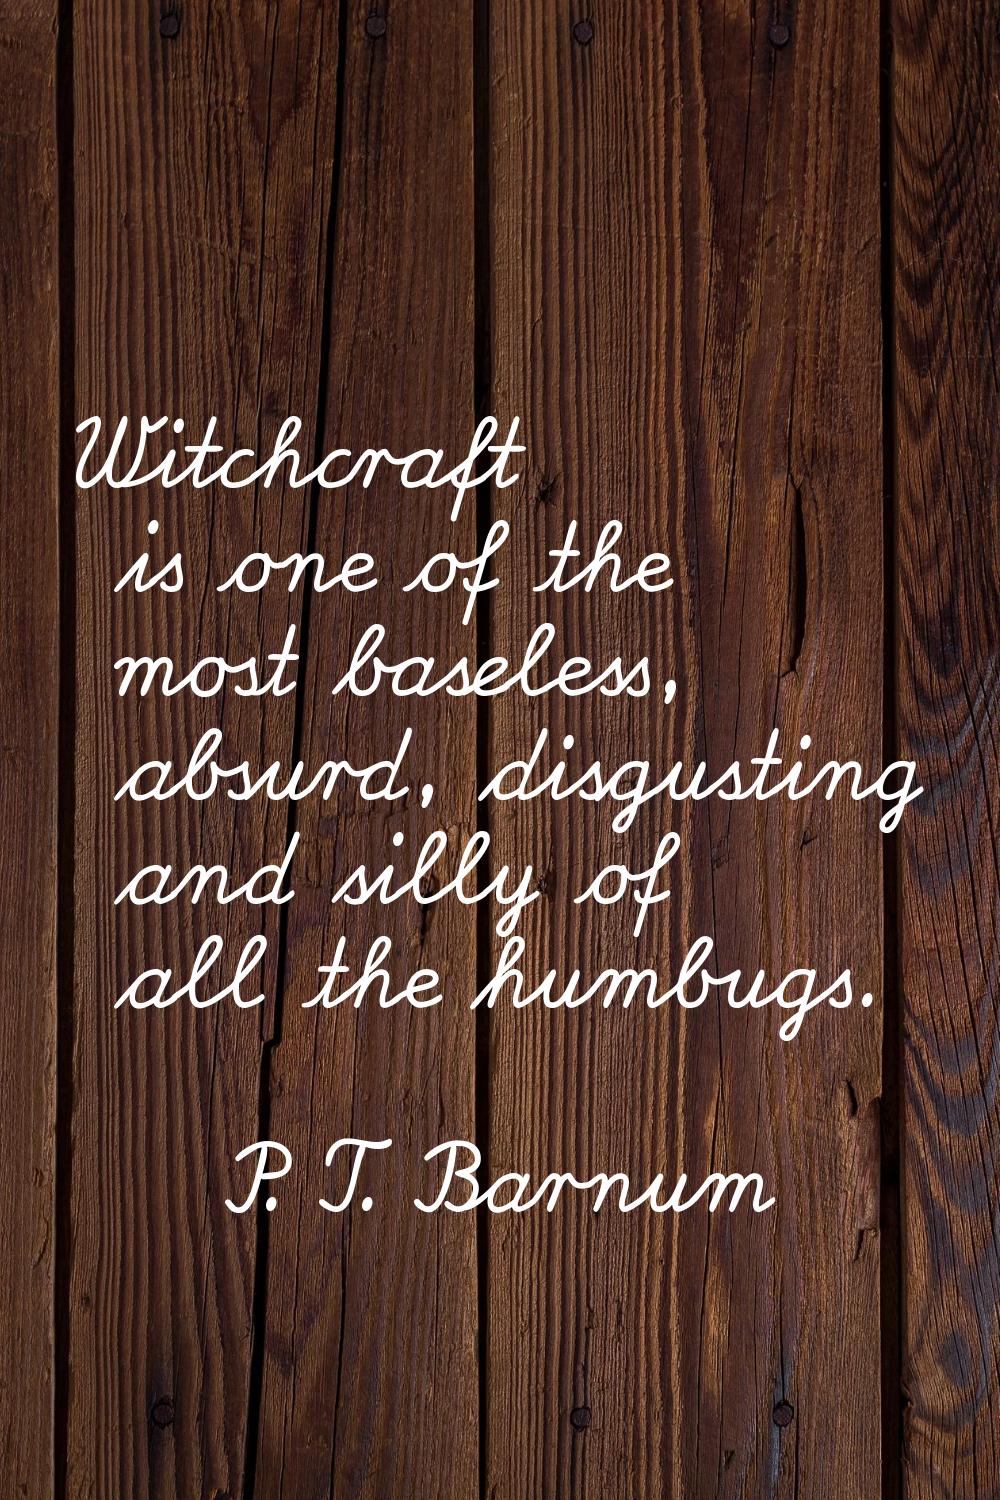 Witchcraft is one of the most baseless, absurd, disgusting and silly of all the humbugs.